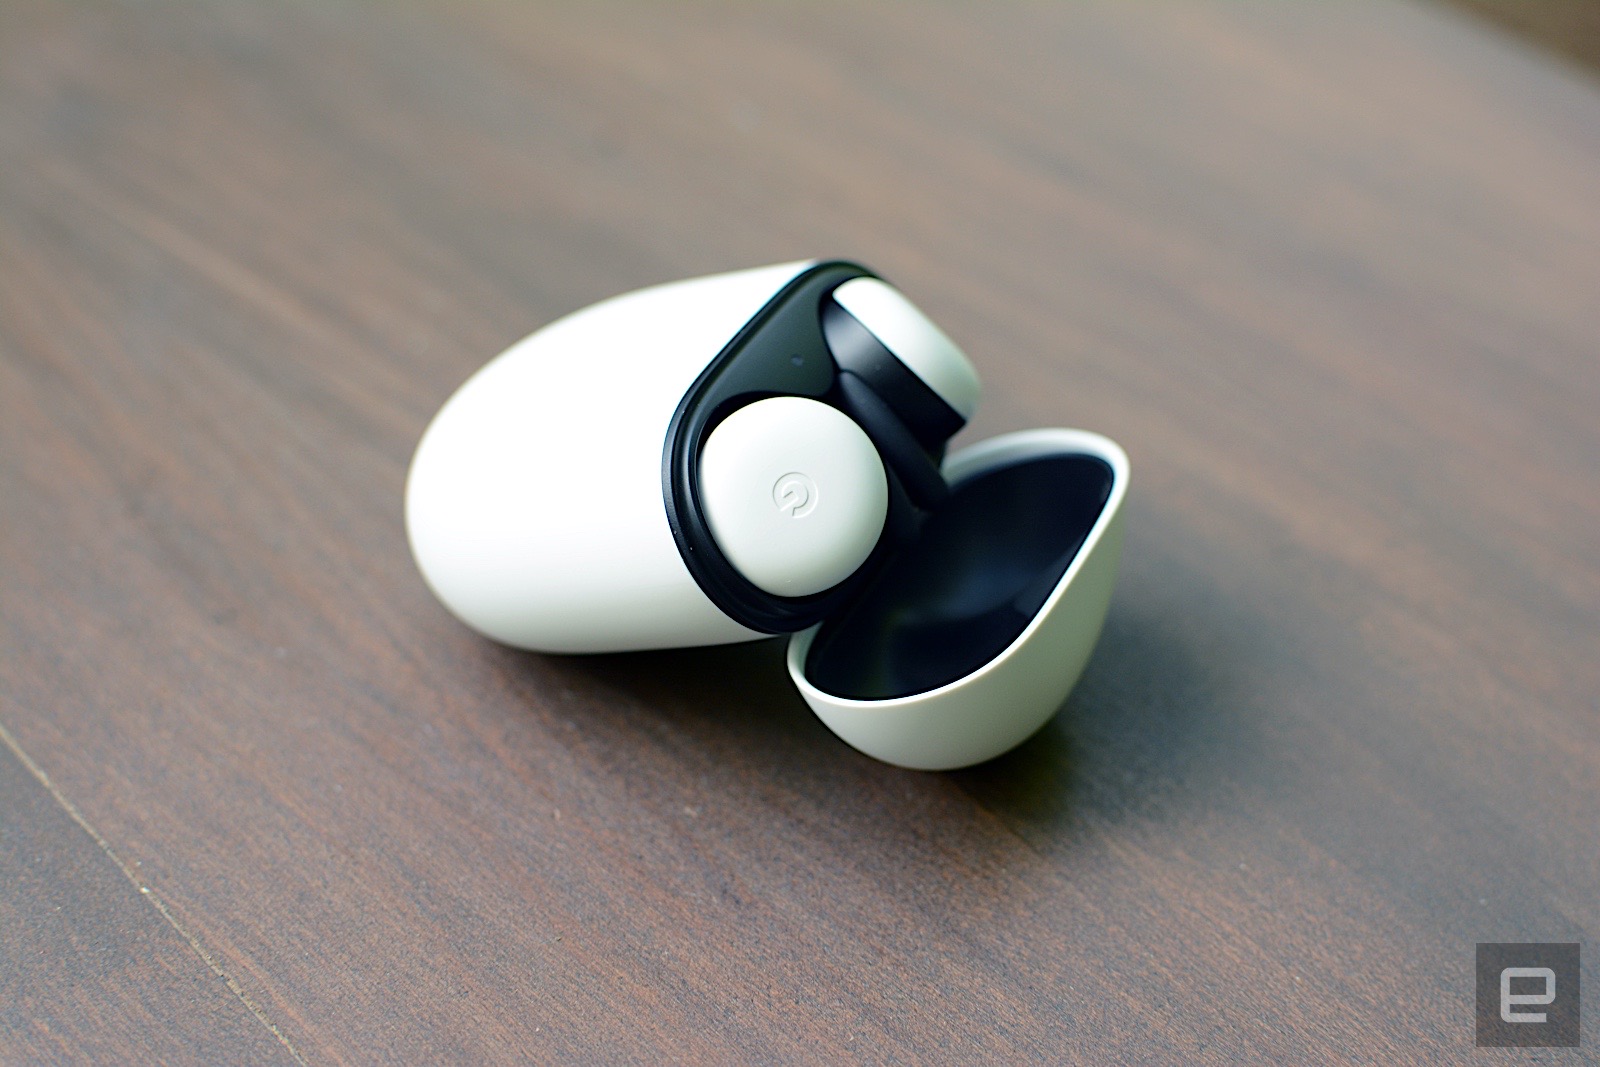 The company completely overhauled its Google Assistant earbuds to make something worth your money.